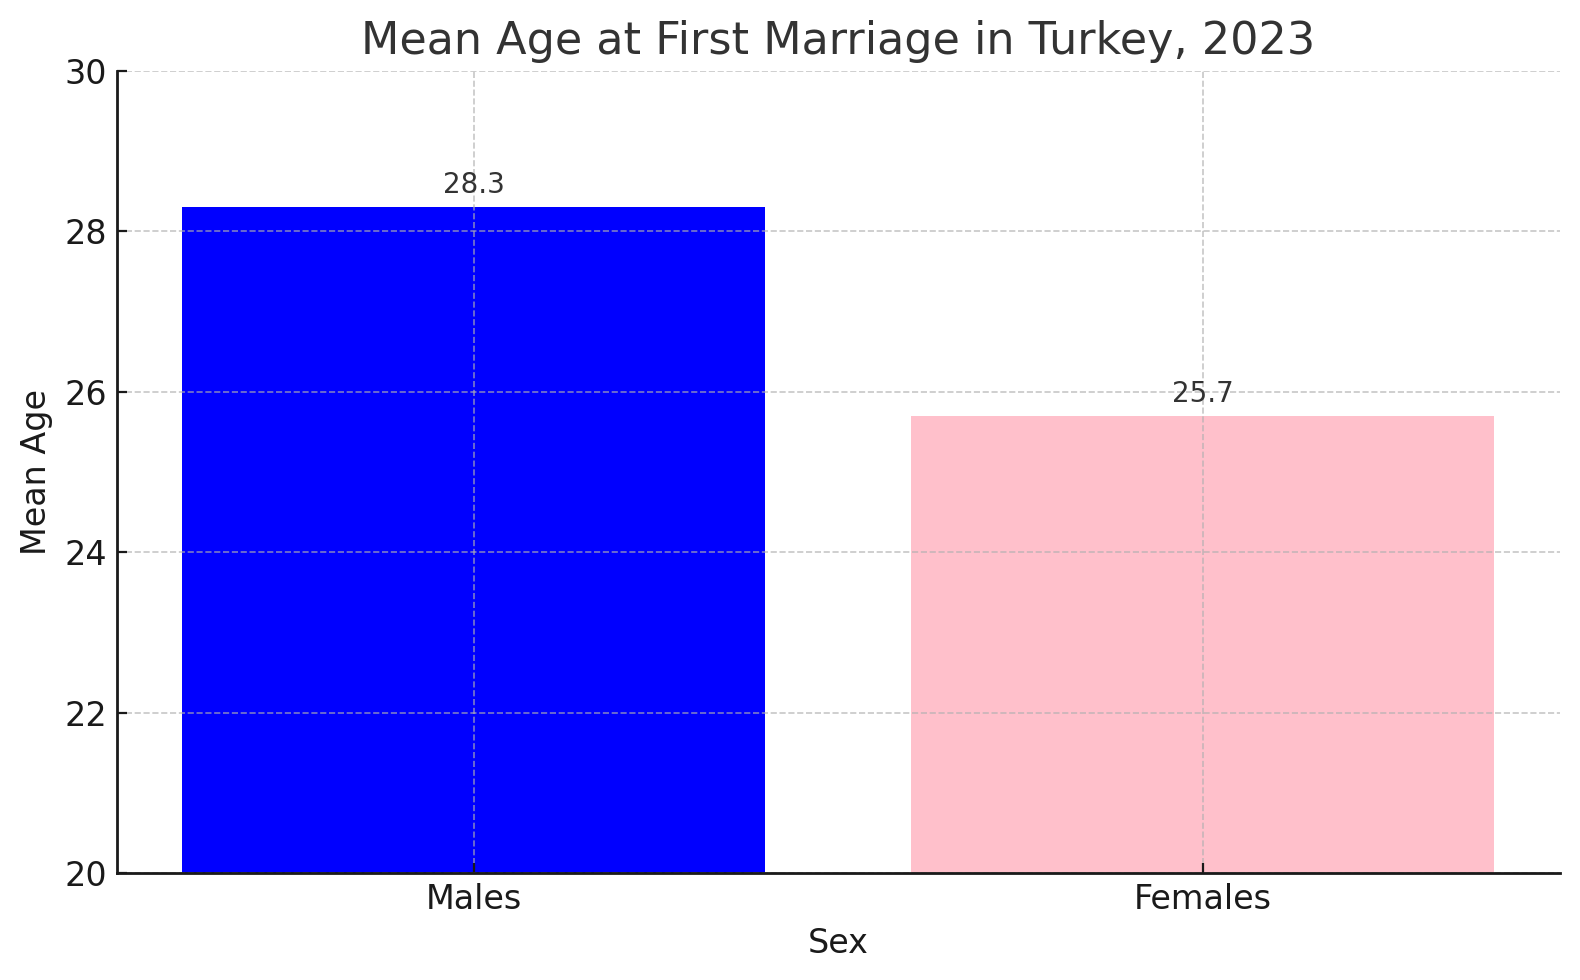 Chart shows Mean Age at First Marriage 2022 - 2023